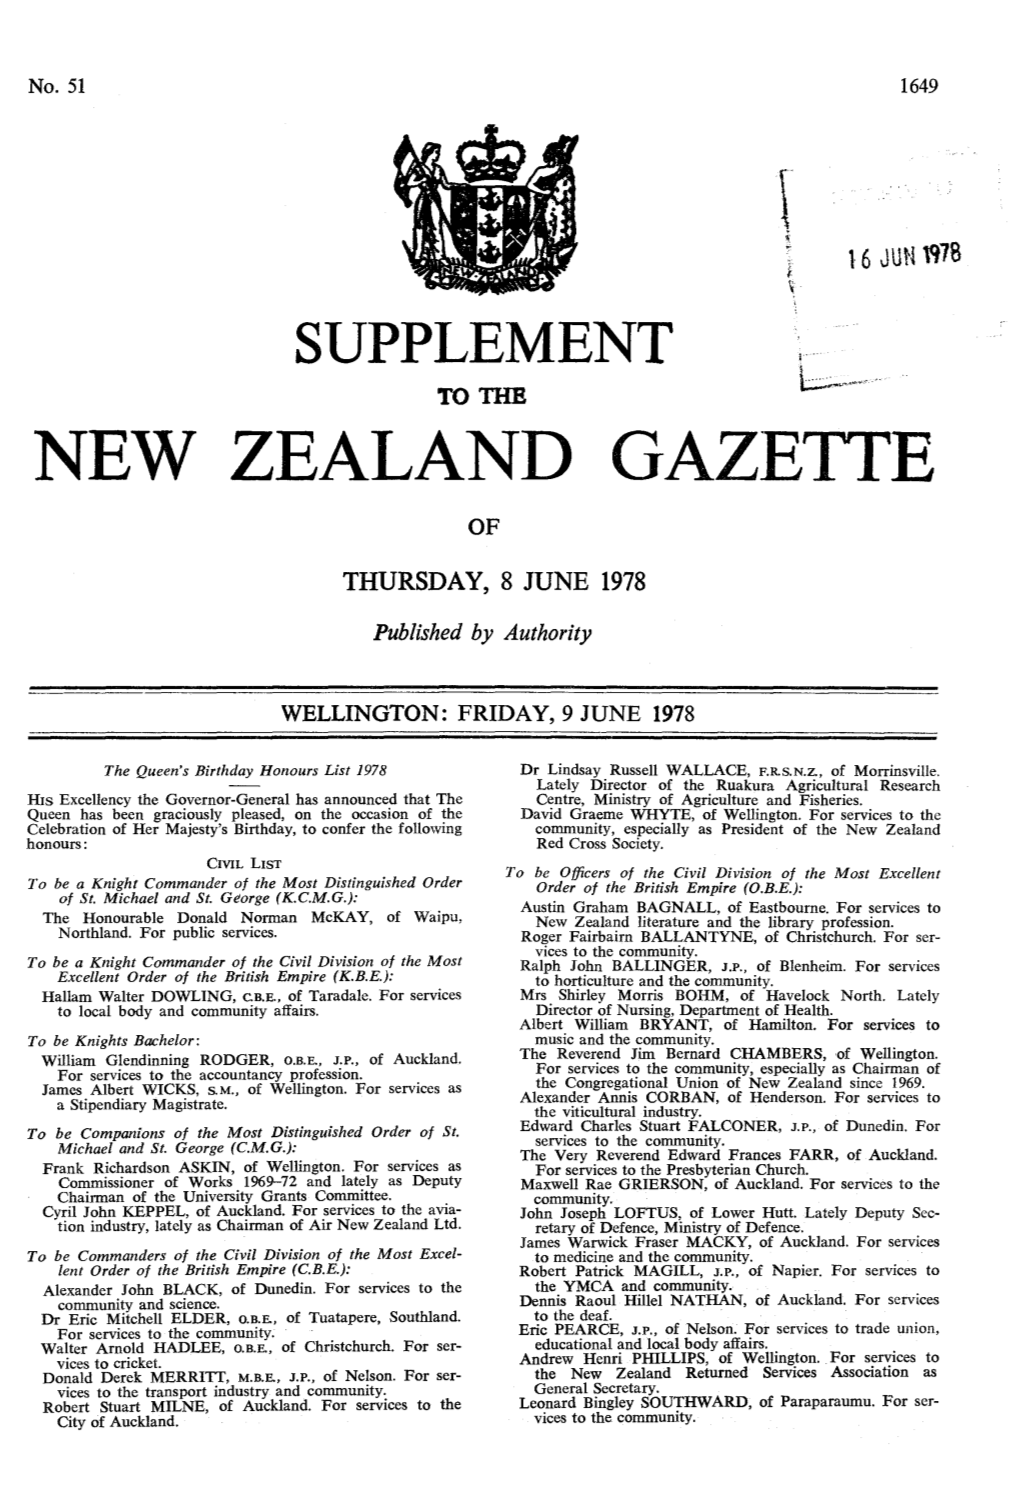 Queen's Birthday Honours List 1978 Dr Lindsay Russell WALLACE, F.R.S.N.Z., of Morrinsville